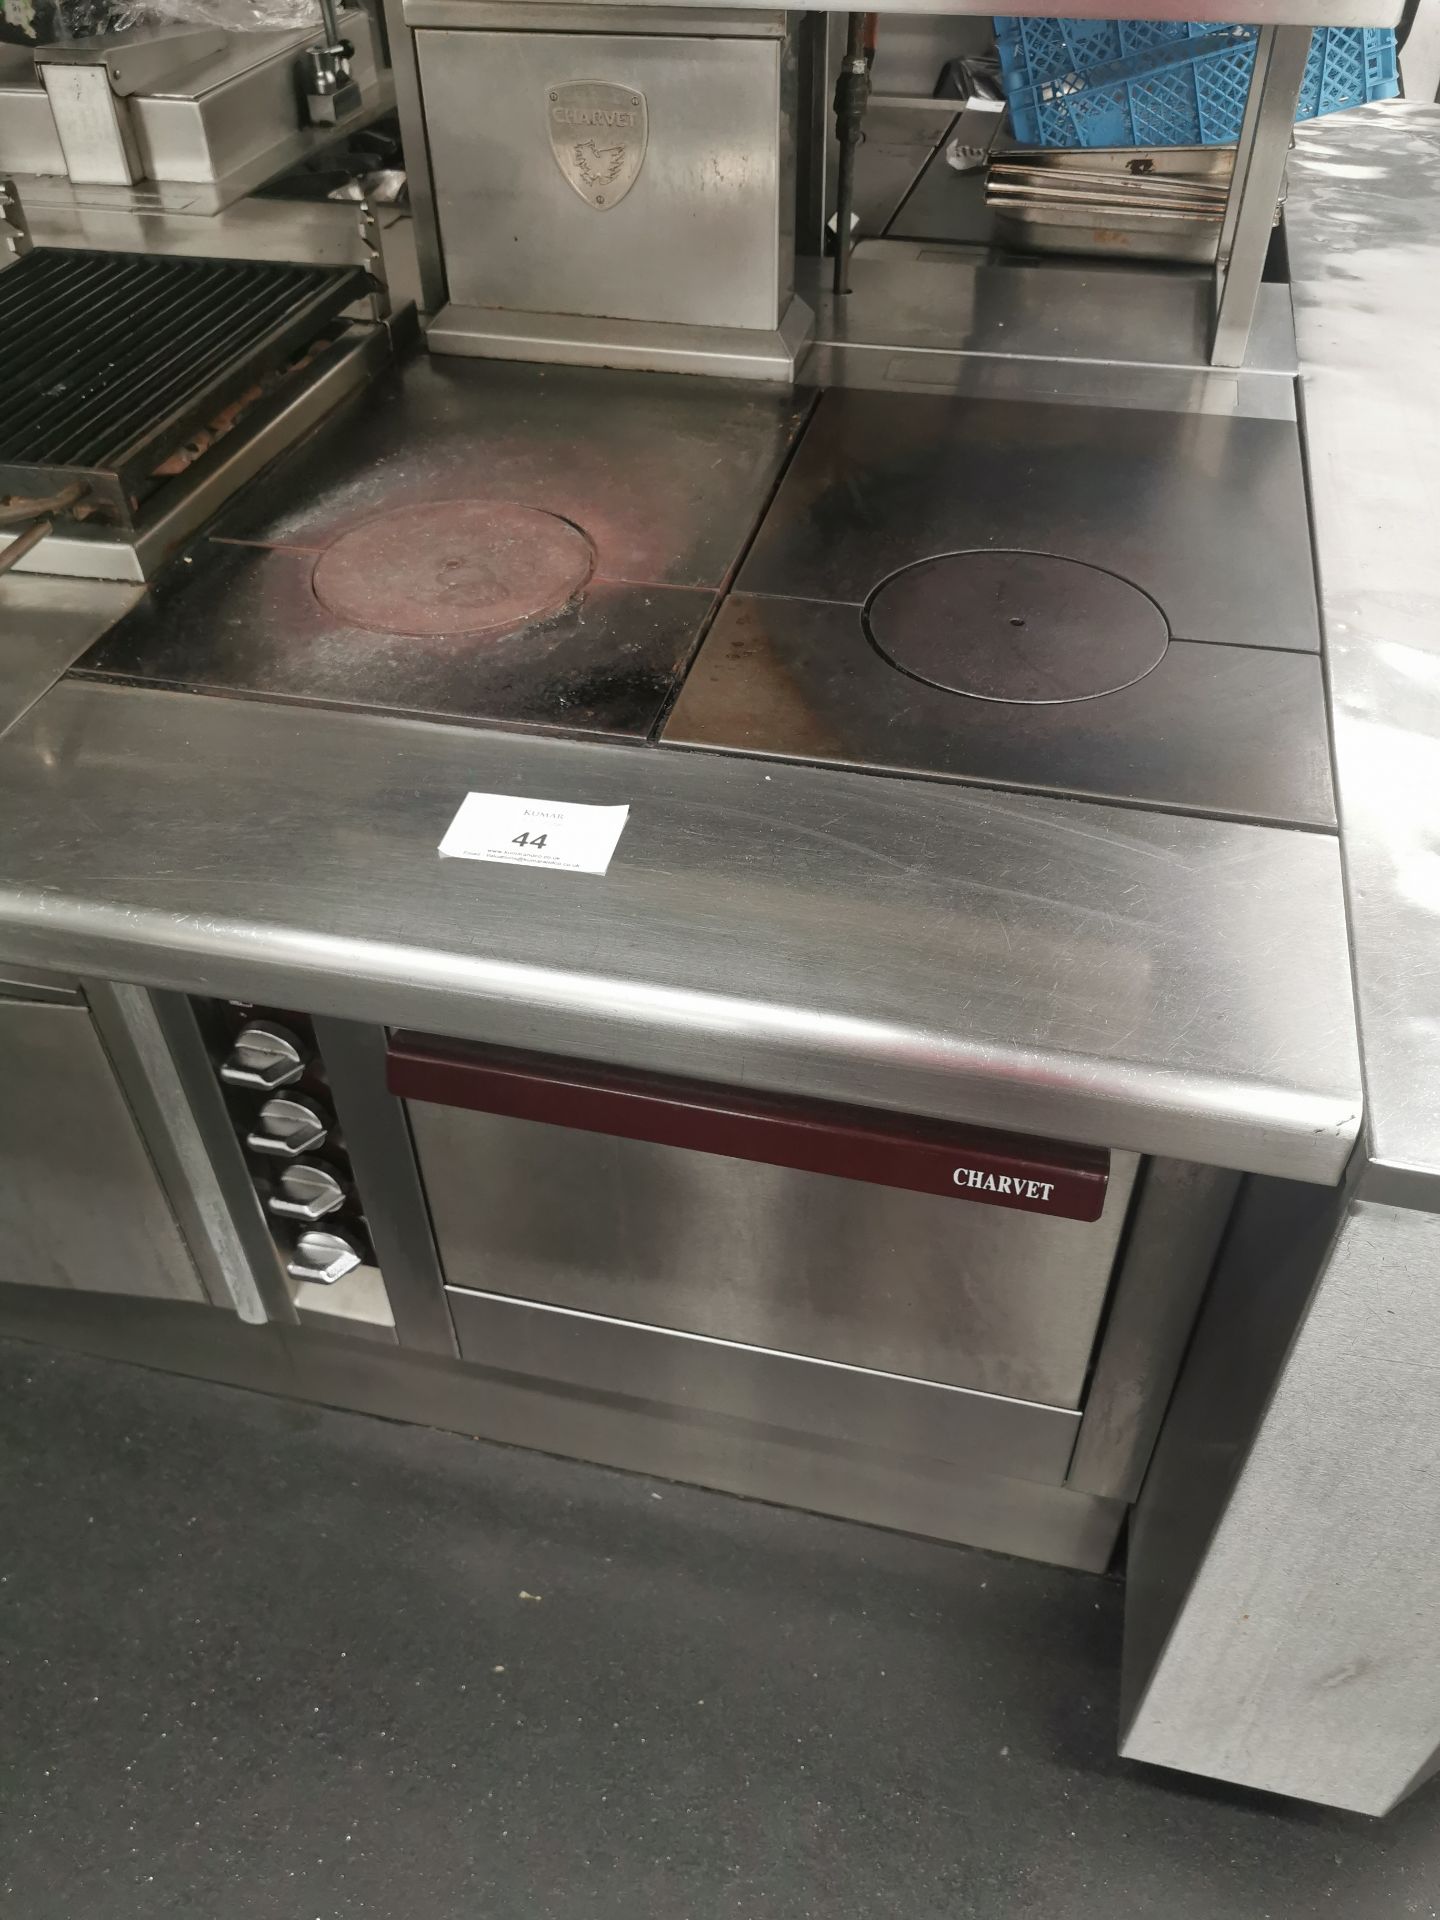 Charvet pro series twin hot plates and oven W85cm - Image 2 of 5